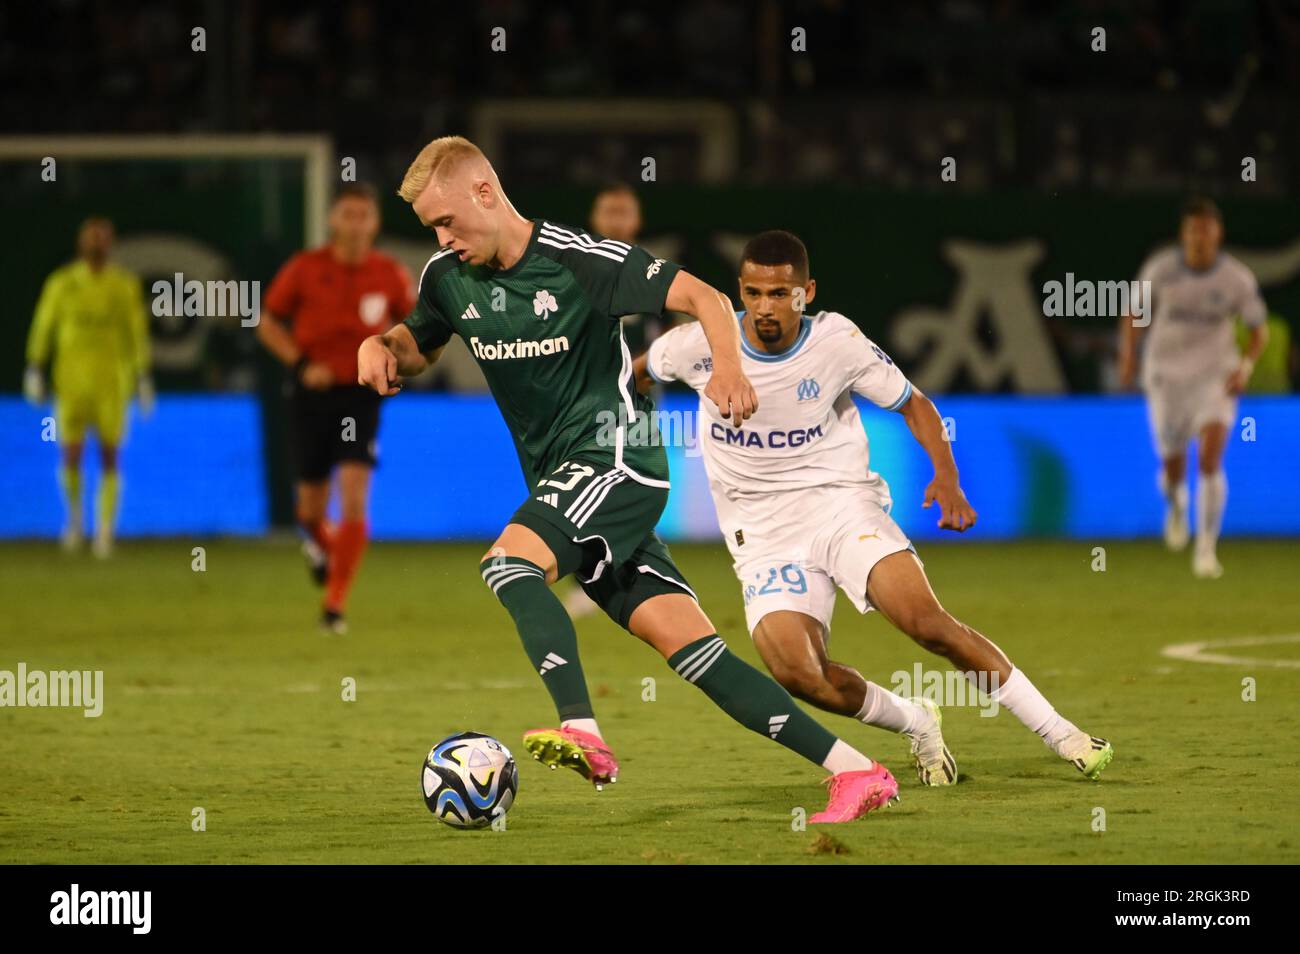 BUDAPEST, HUNGARY - AUGUST 4: Stjepan Loncar of Ferencvarosi TC controls  the ball during the UEFA Champions League Third Qualifying Round 1st Leg  match between Ferencvarosi TC and SK Slavia Praha at